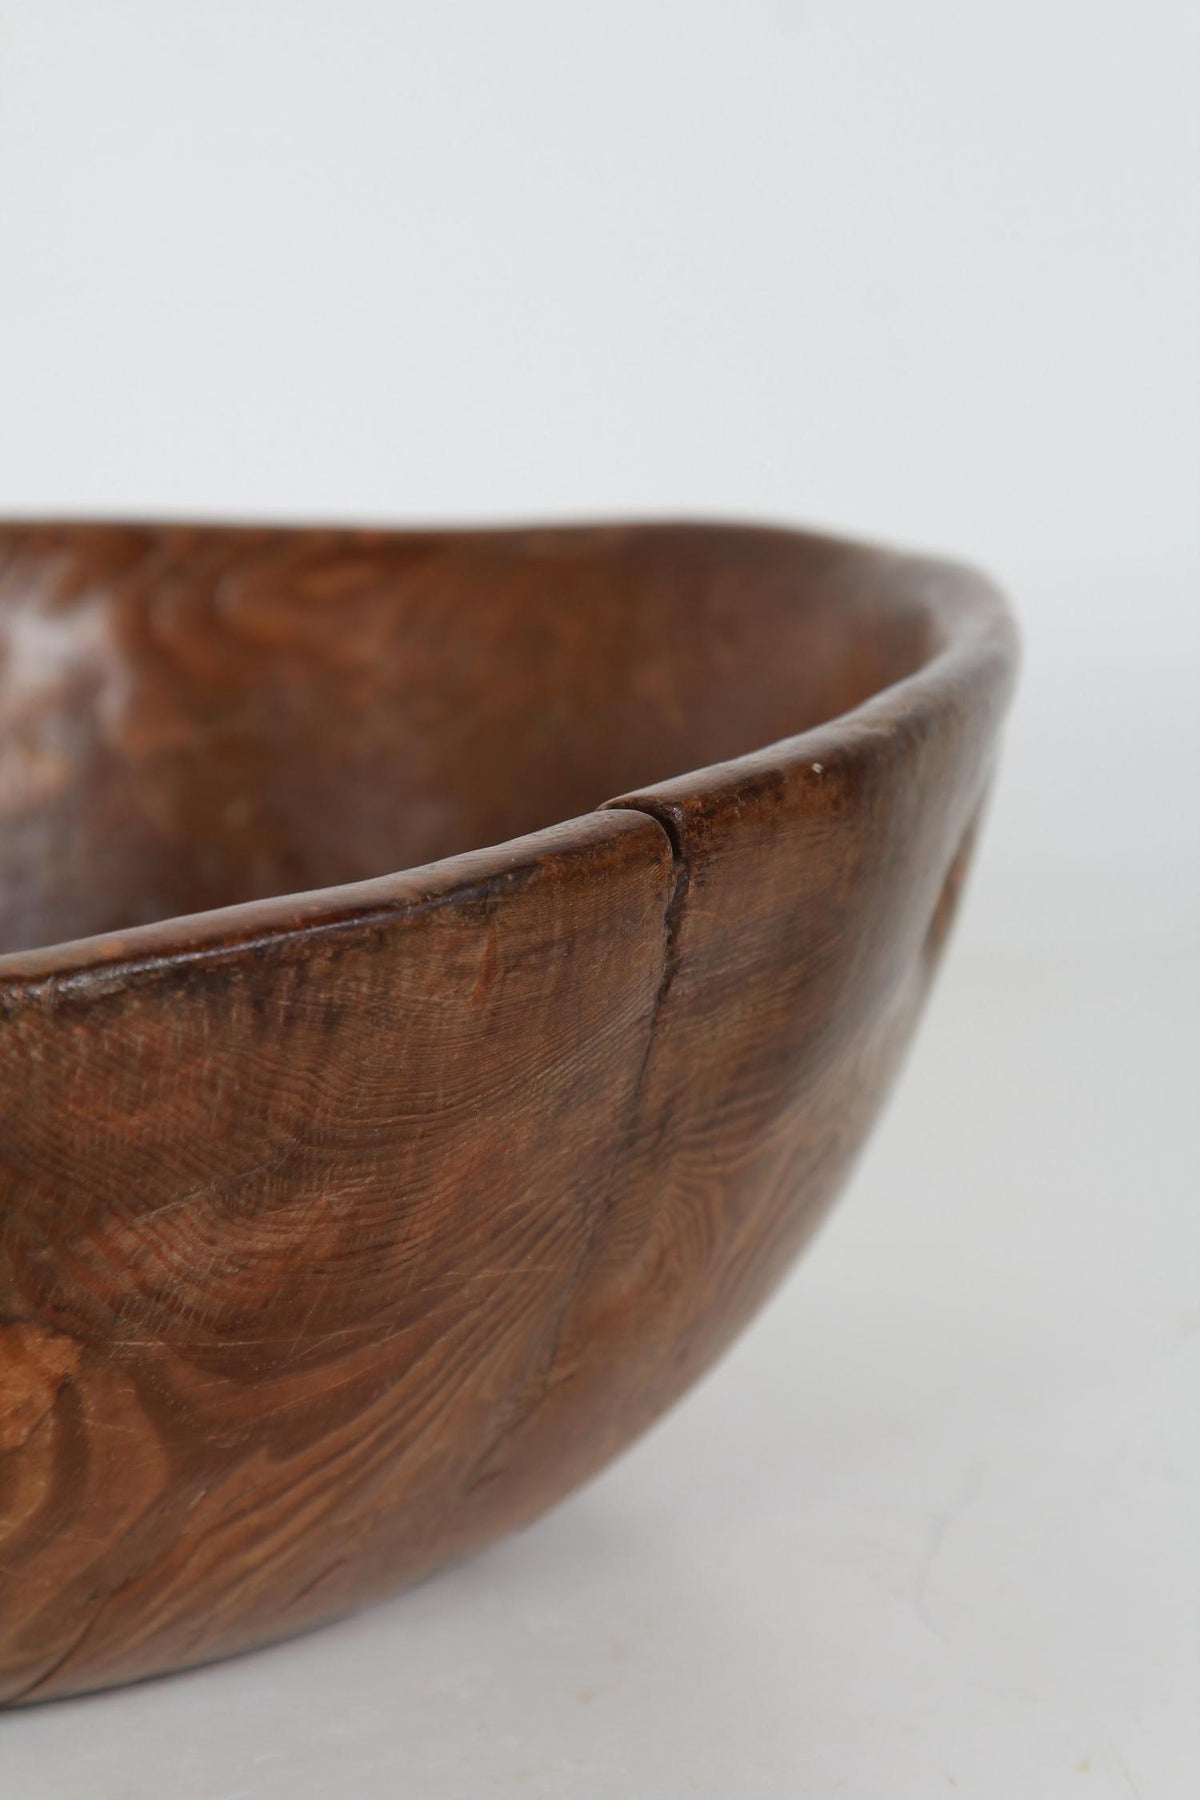 EXQUISITE DUG OUT PRIMITIVE SWEDISH ROOT BOWL DATED 1840